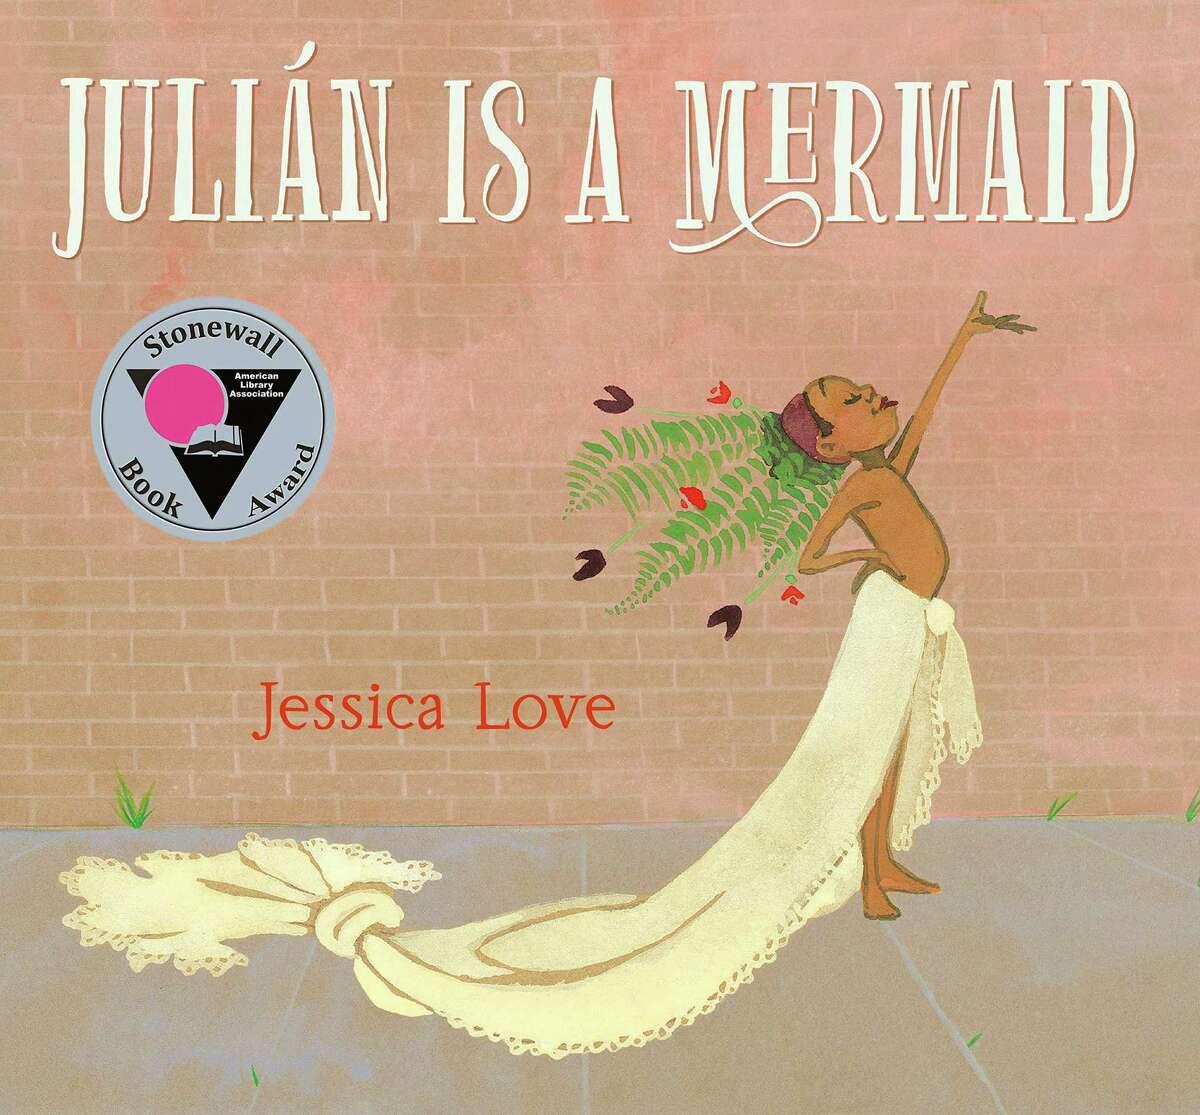 Fairfield Library’s Take Your Mermaid to the Library Day will feature a visit by author/illustrator Jessica Love, who will share her award-winning book “Julián is a Mermaid,” on Feb. 1.